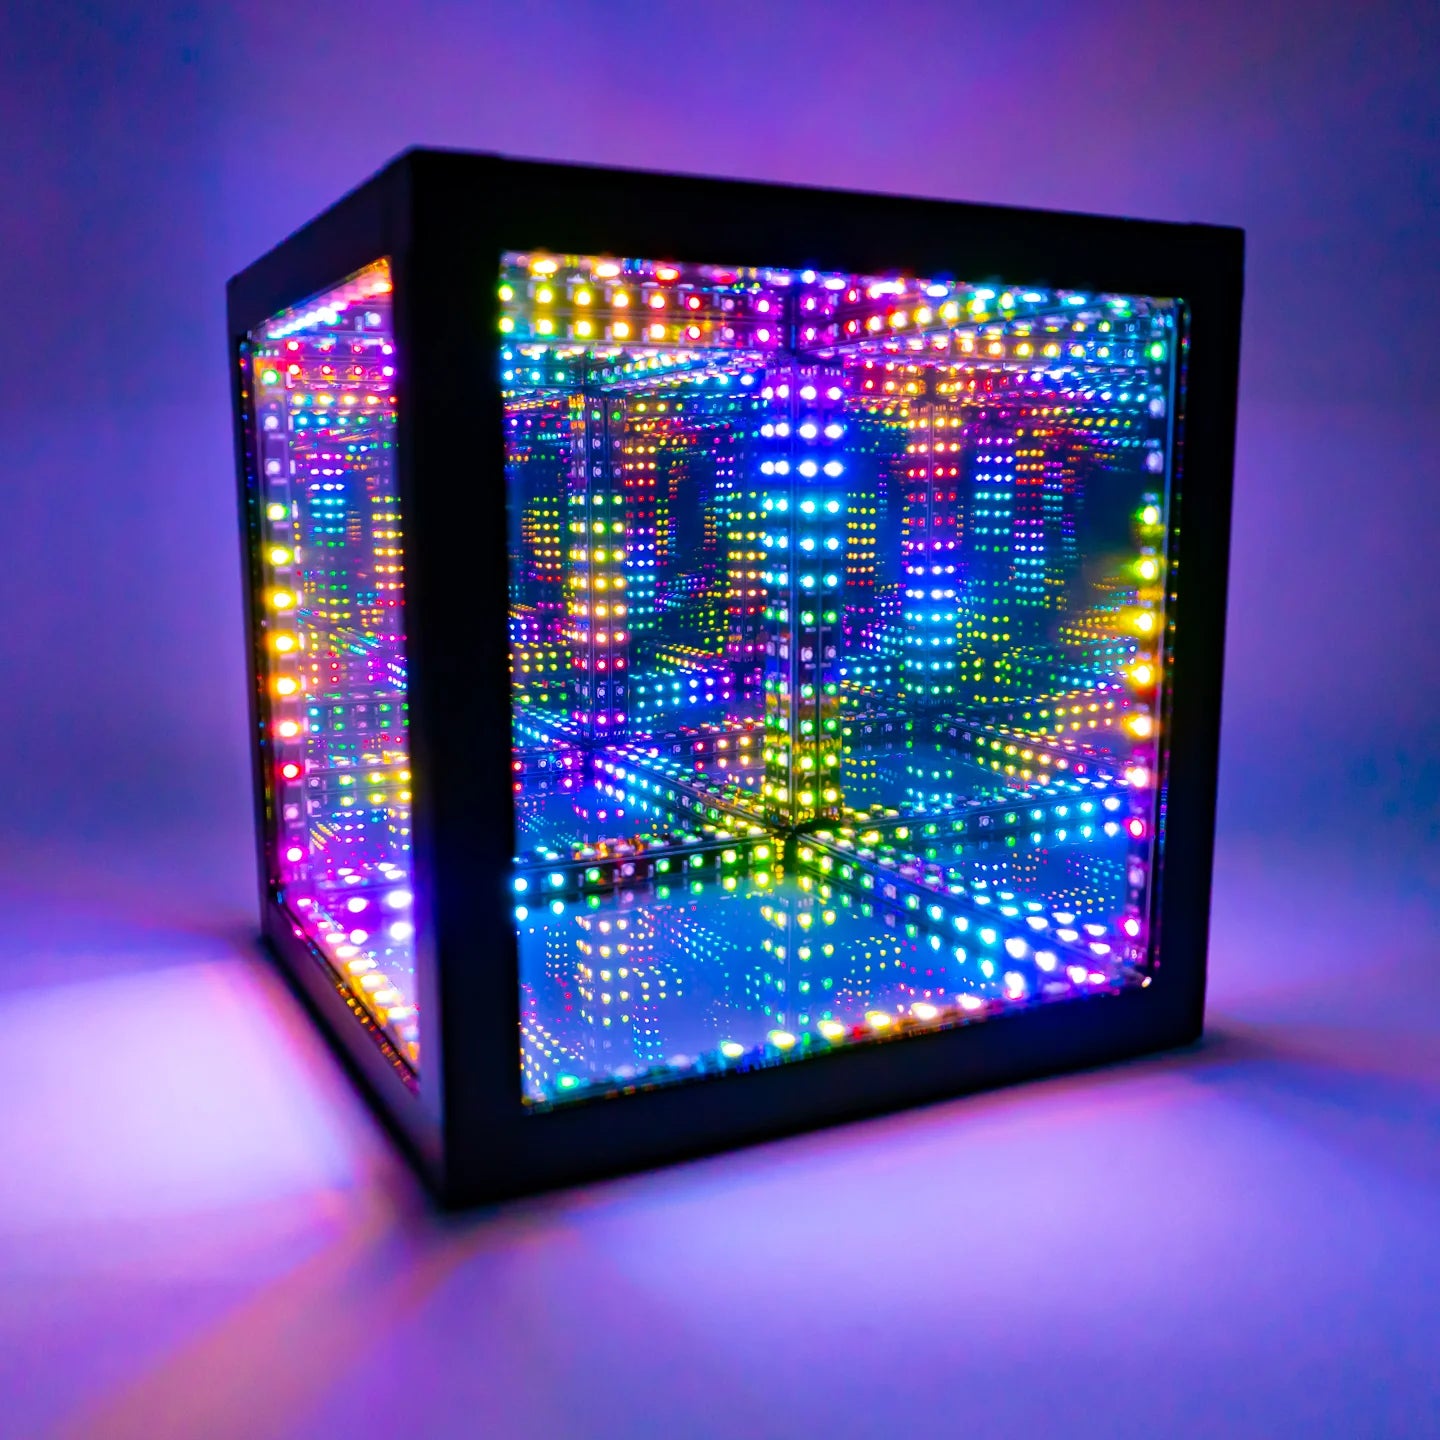 A colorful cube of LED lights, perfect for creating spooky ambiance during Halloween